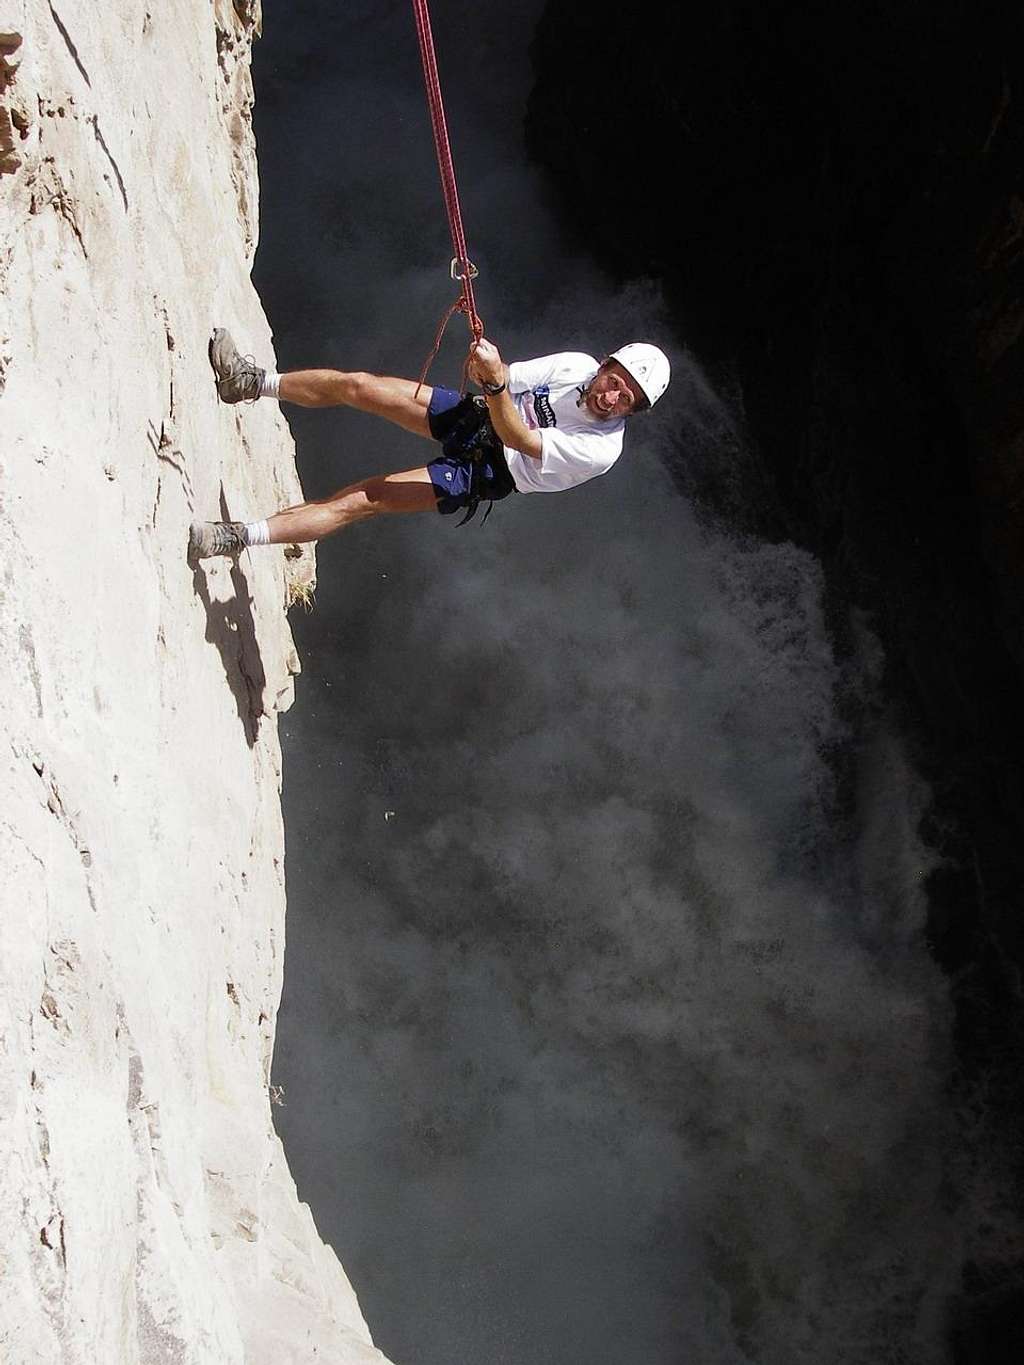 Being Lowered Into Sipia Falls